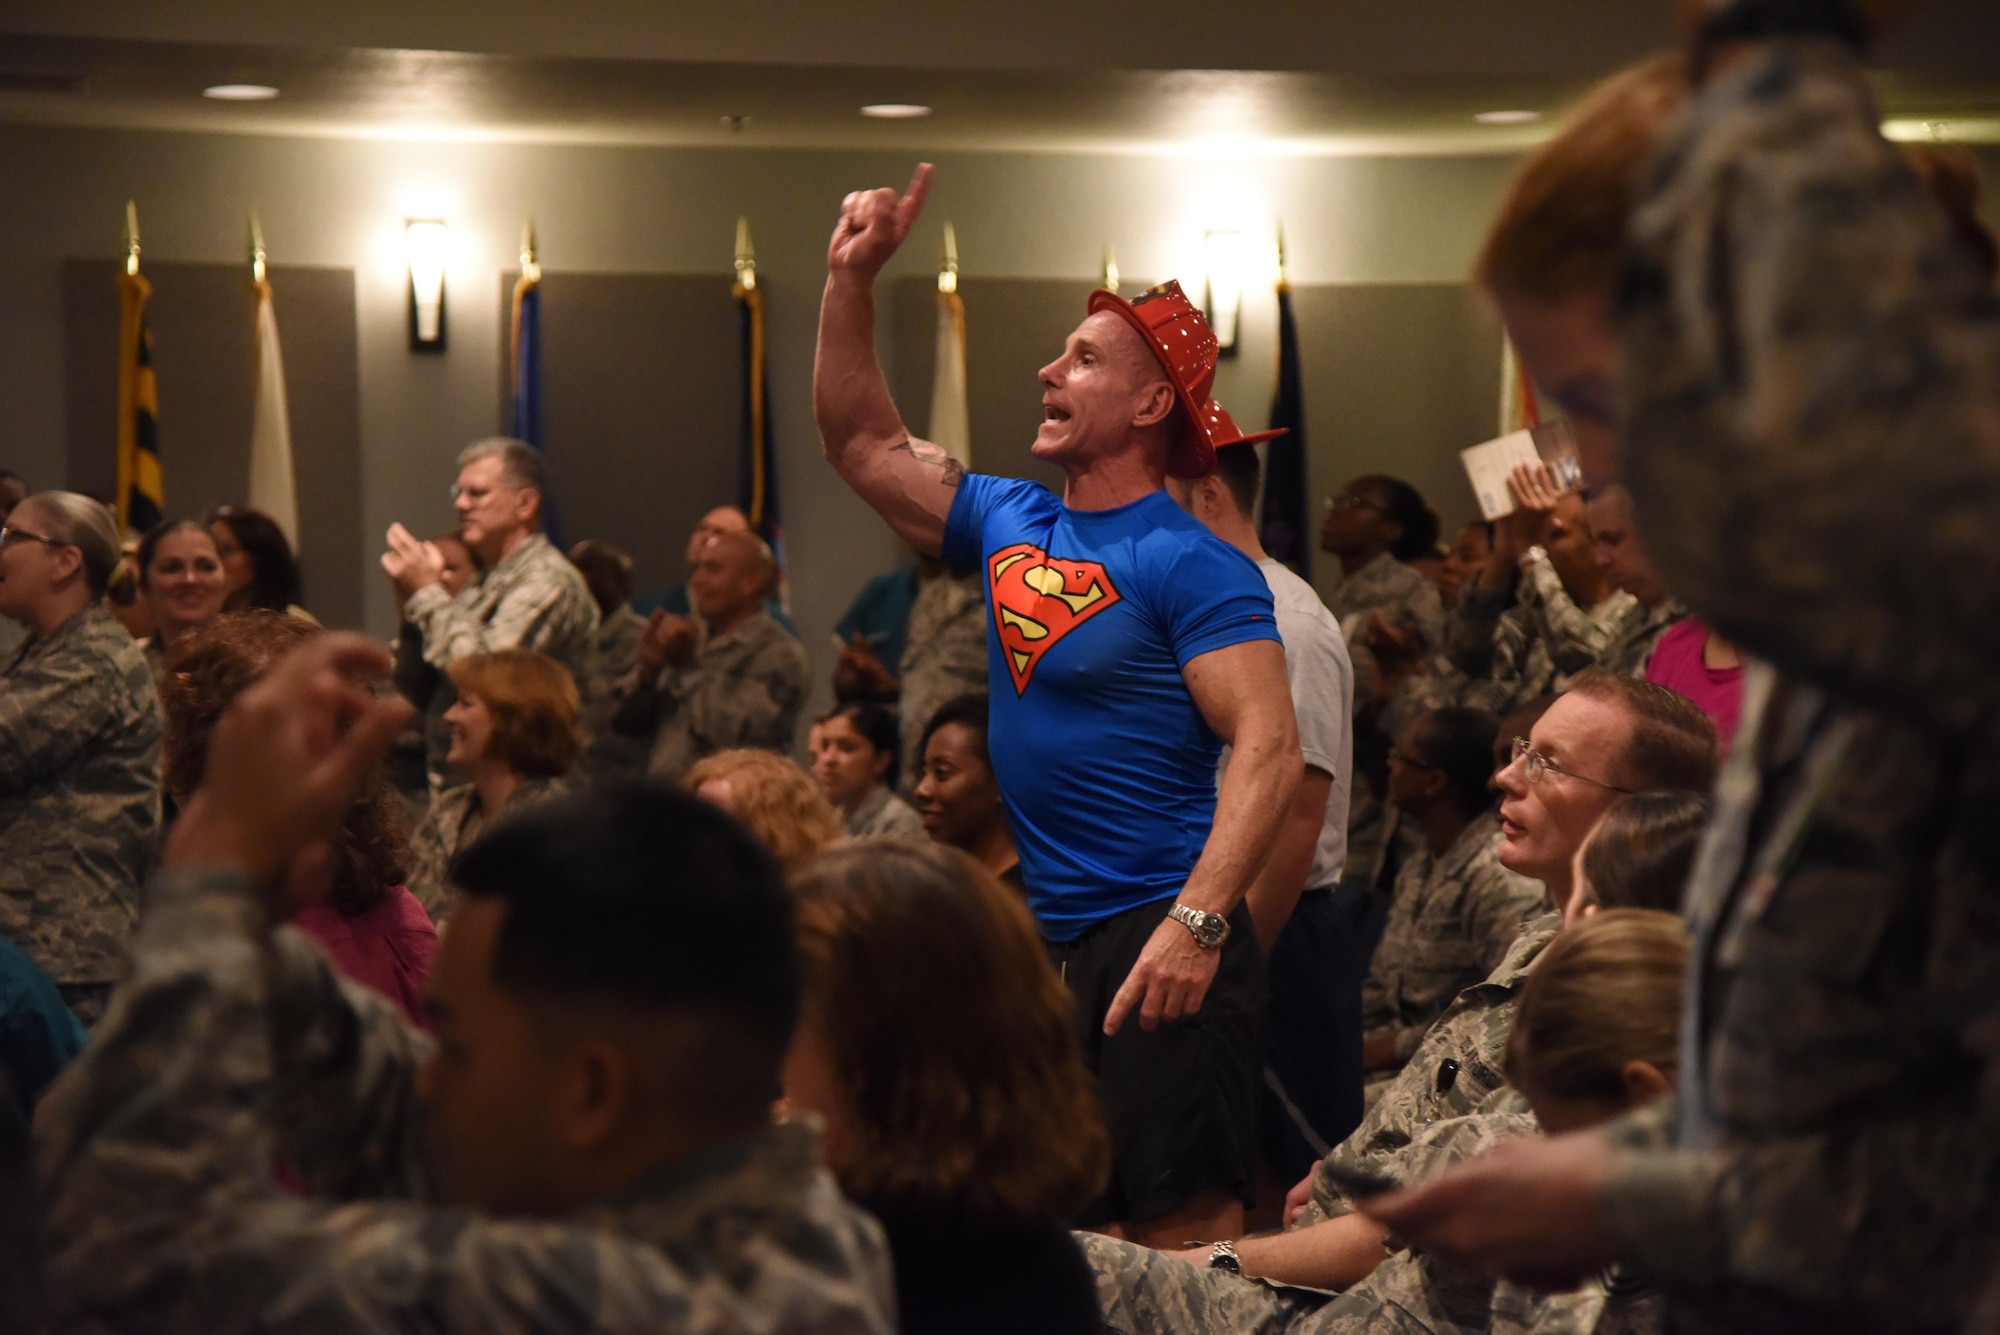 Chief Master Sgt. Karl Day, 81st Medical Group superintendent, shouts out a comment during the 81st MDG Push-up Competition at the Keesler Medical Center Don Wylie Auditorium Nov. 1, 2016, on Keesler Air Force Base, Miss. Seven five-person teams competed in the event pushing out a total of 6,272 push-ups. The 81st Dental Squadron was this year’s winner with 1,127 push-ups. The Airmen who participated in the event raised money to support the Krewe of Medics Mardi Gras Ball. (U.S. Air Force photo by Kemberly Groue/Released)
